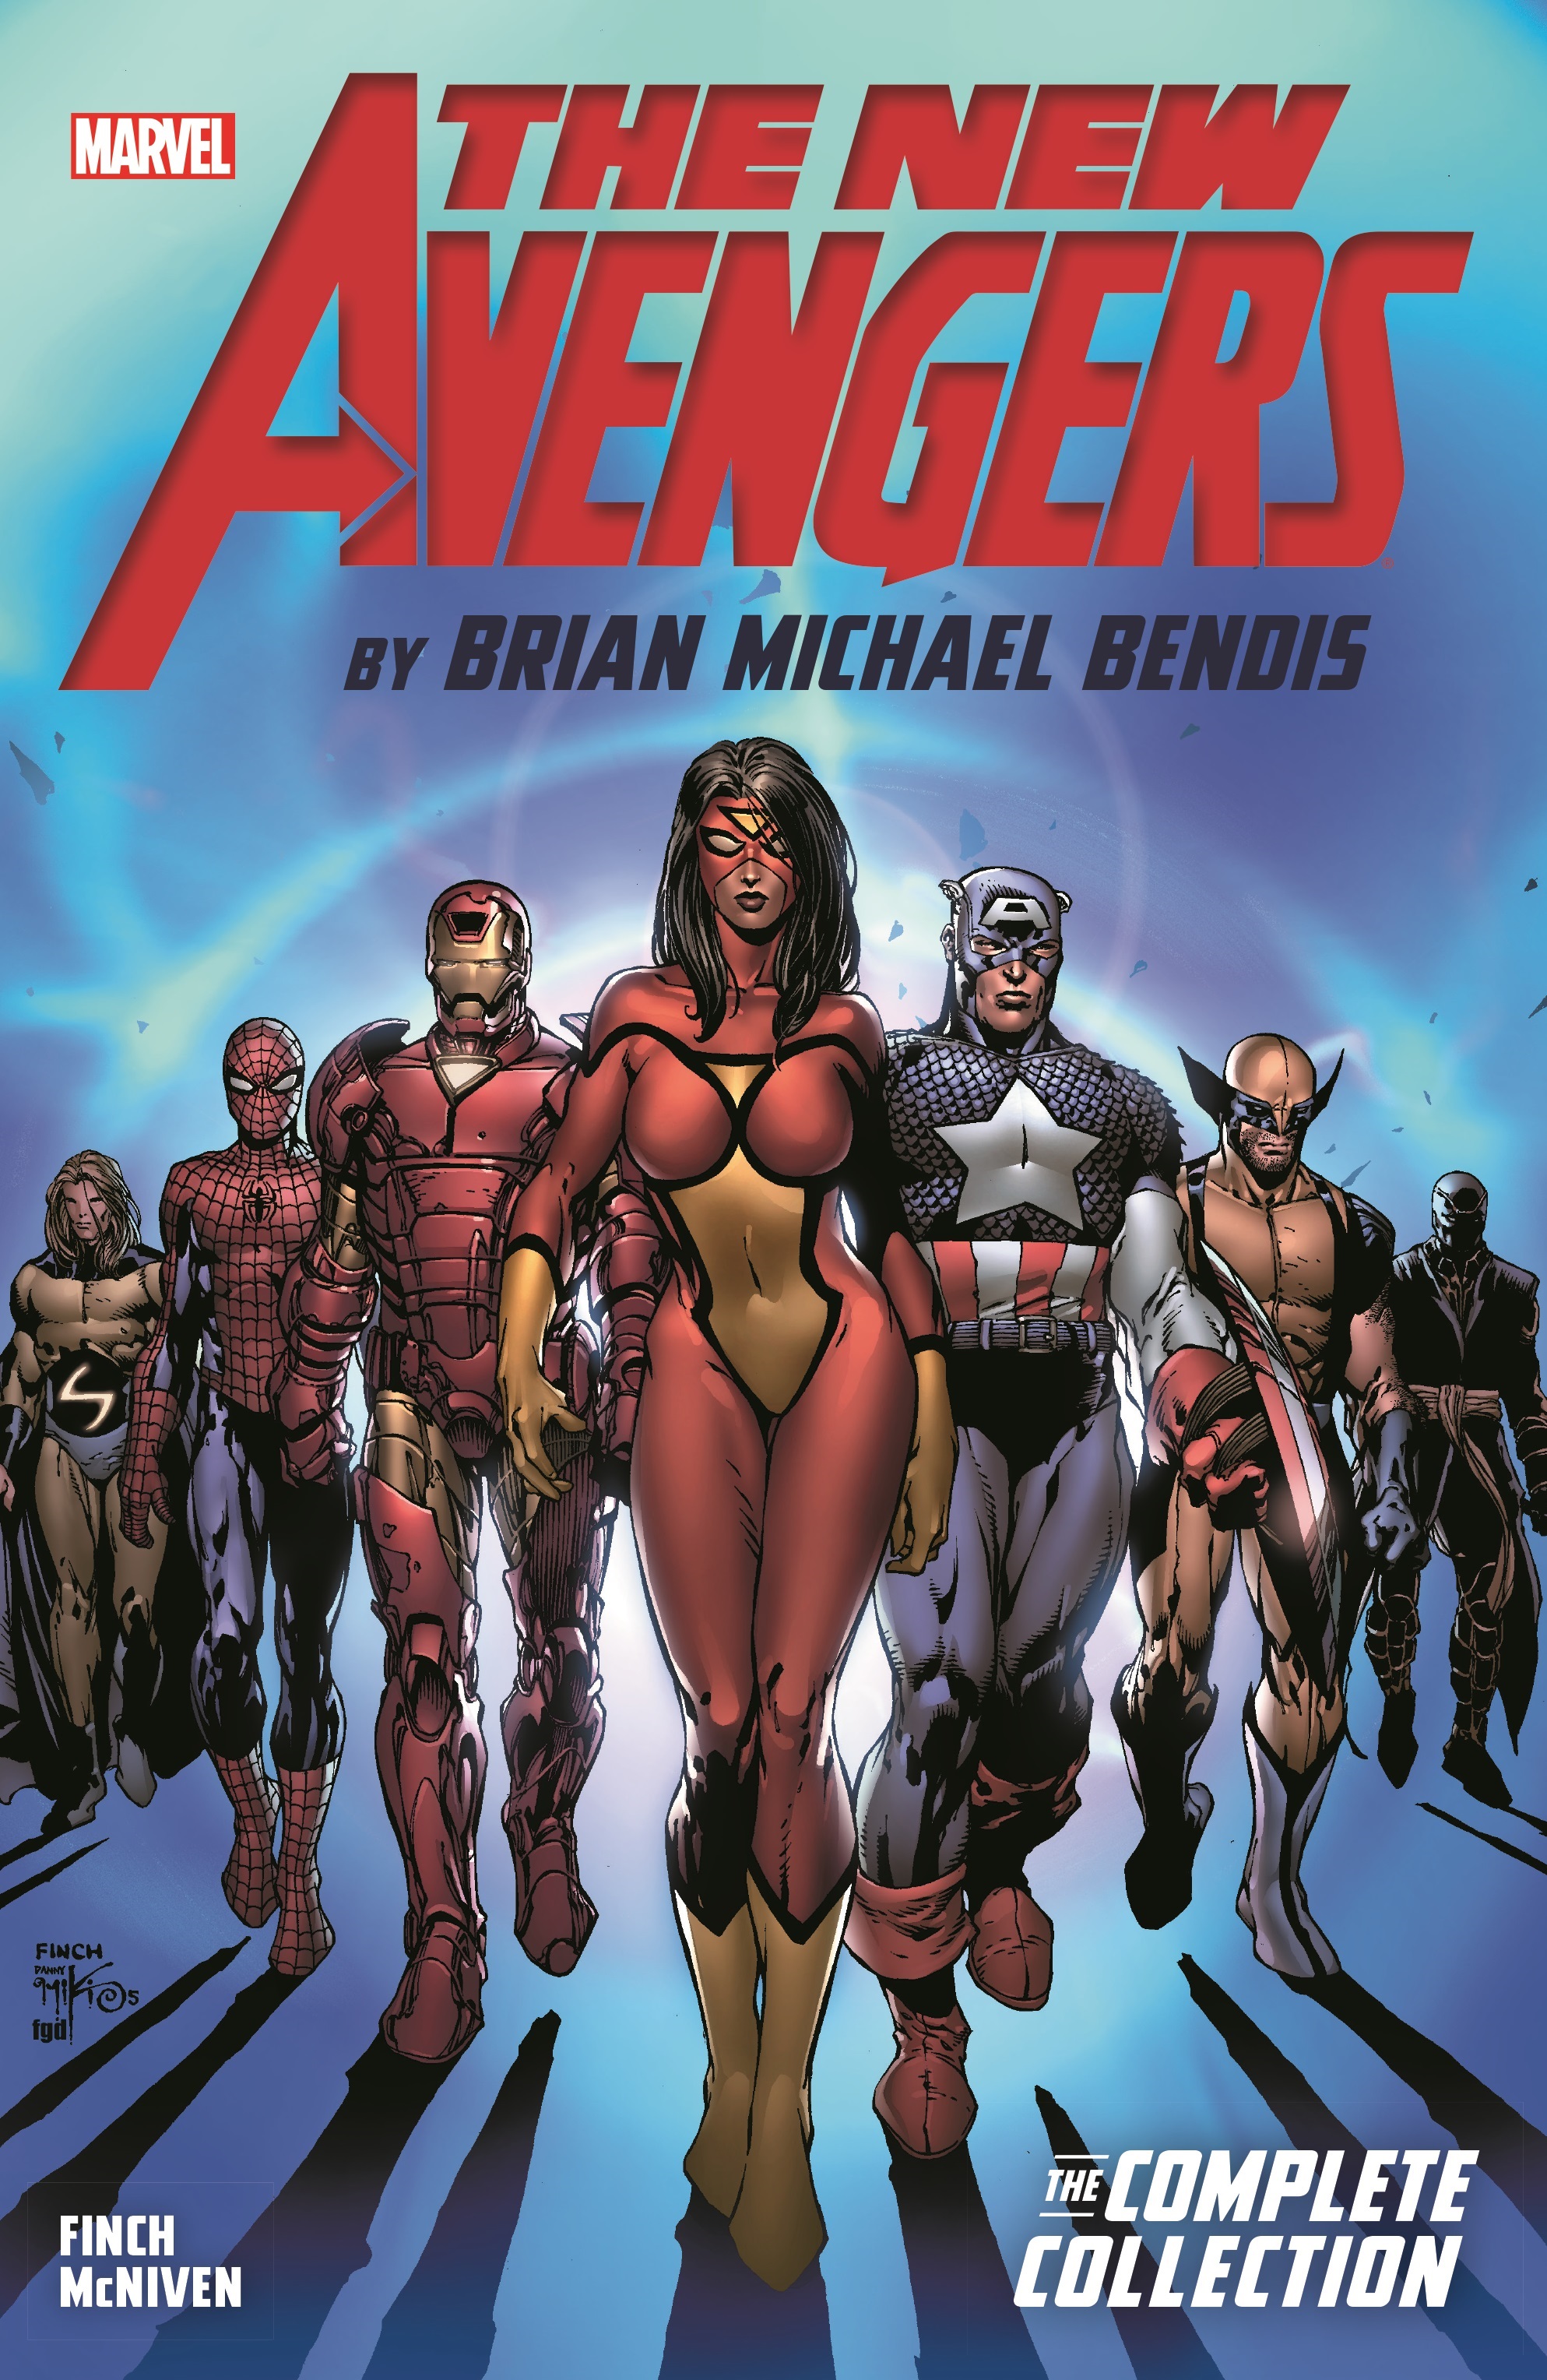 New Avengers by Brian Michael Bendis: The Complete Collection Vol. 1 (Trade Paperback)